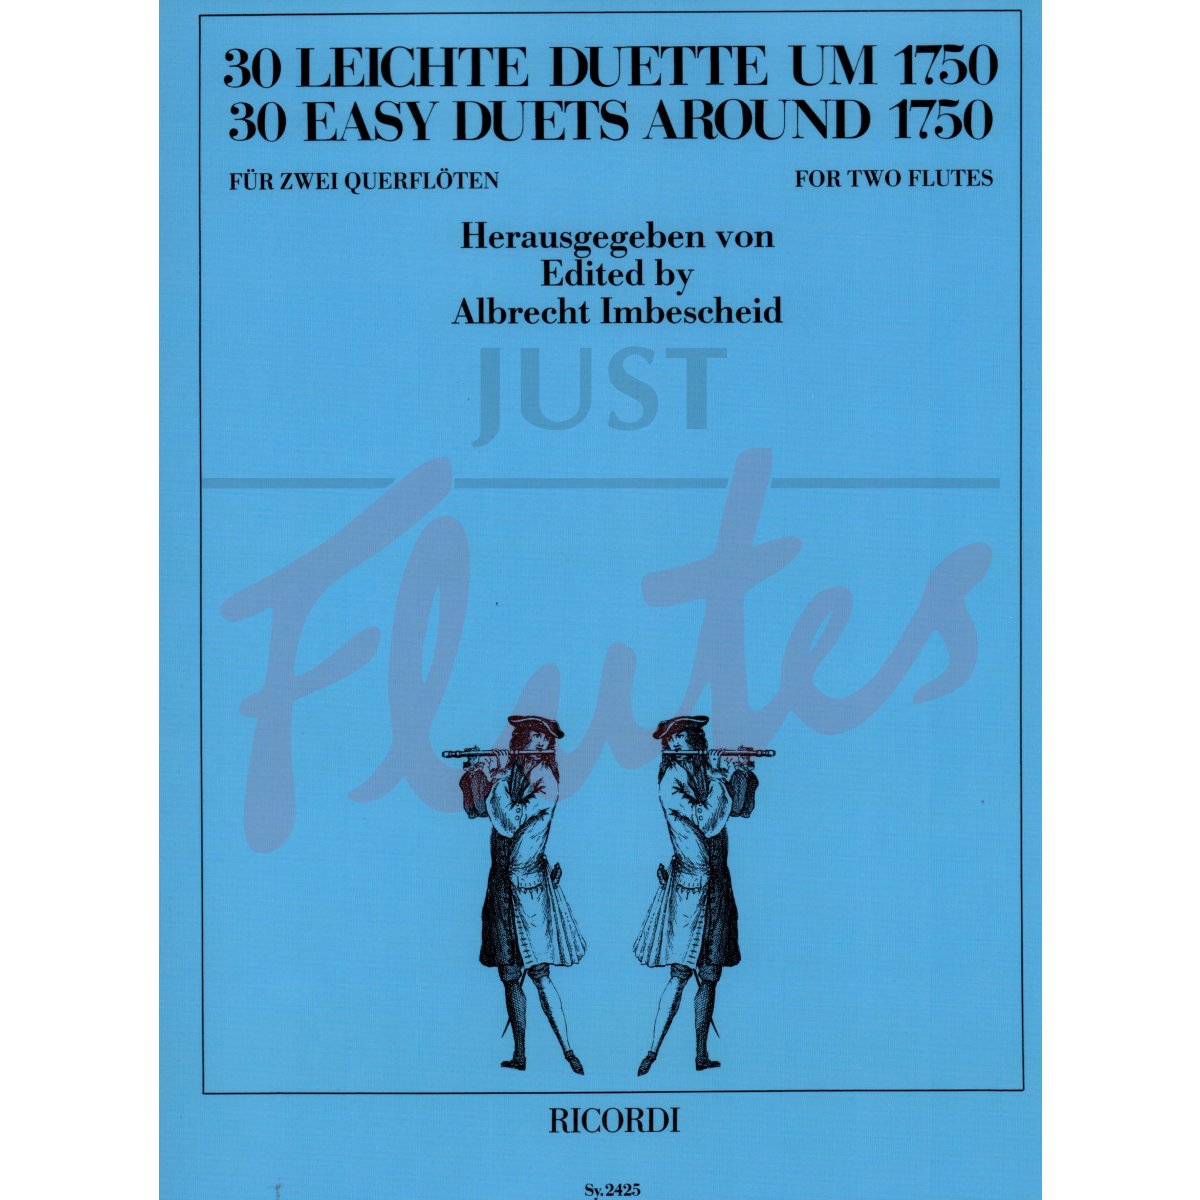 30 Easy Duets Around 1750 for Two Flutes